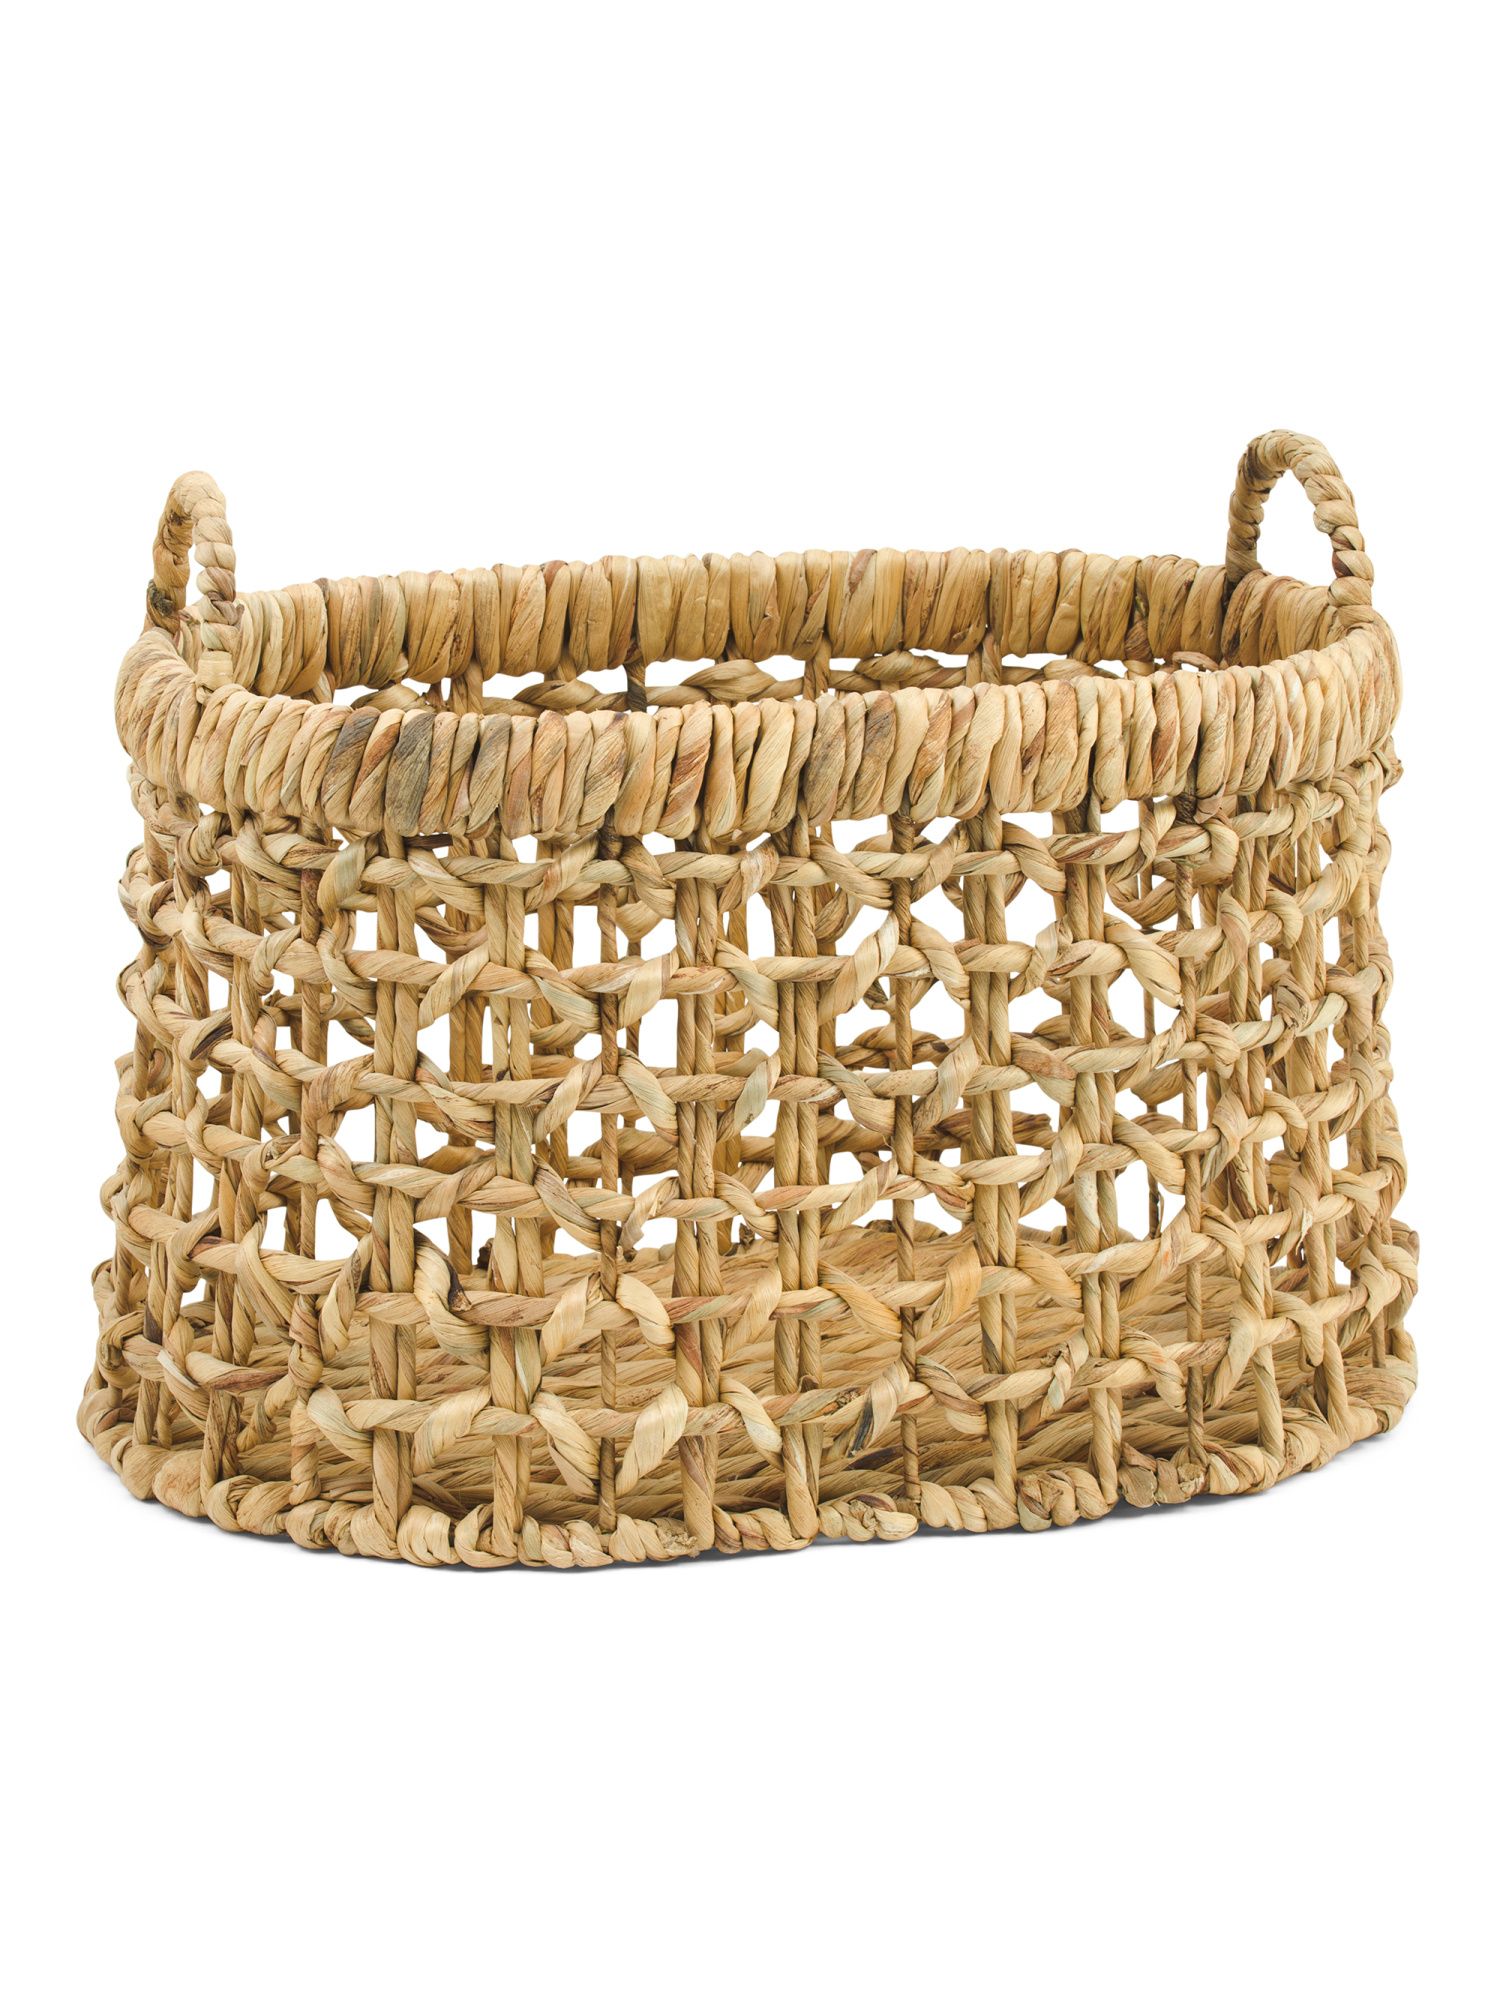 Medium Oval Natural Opened Weave Basket With Handles | TJ Maxx